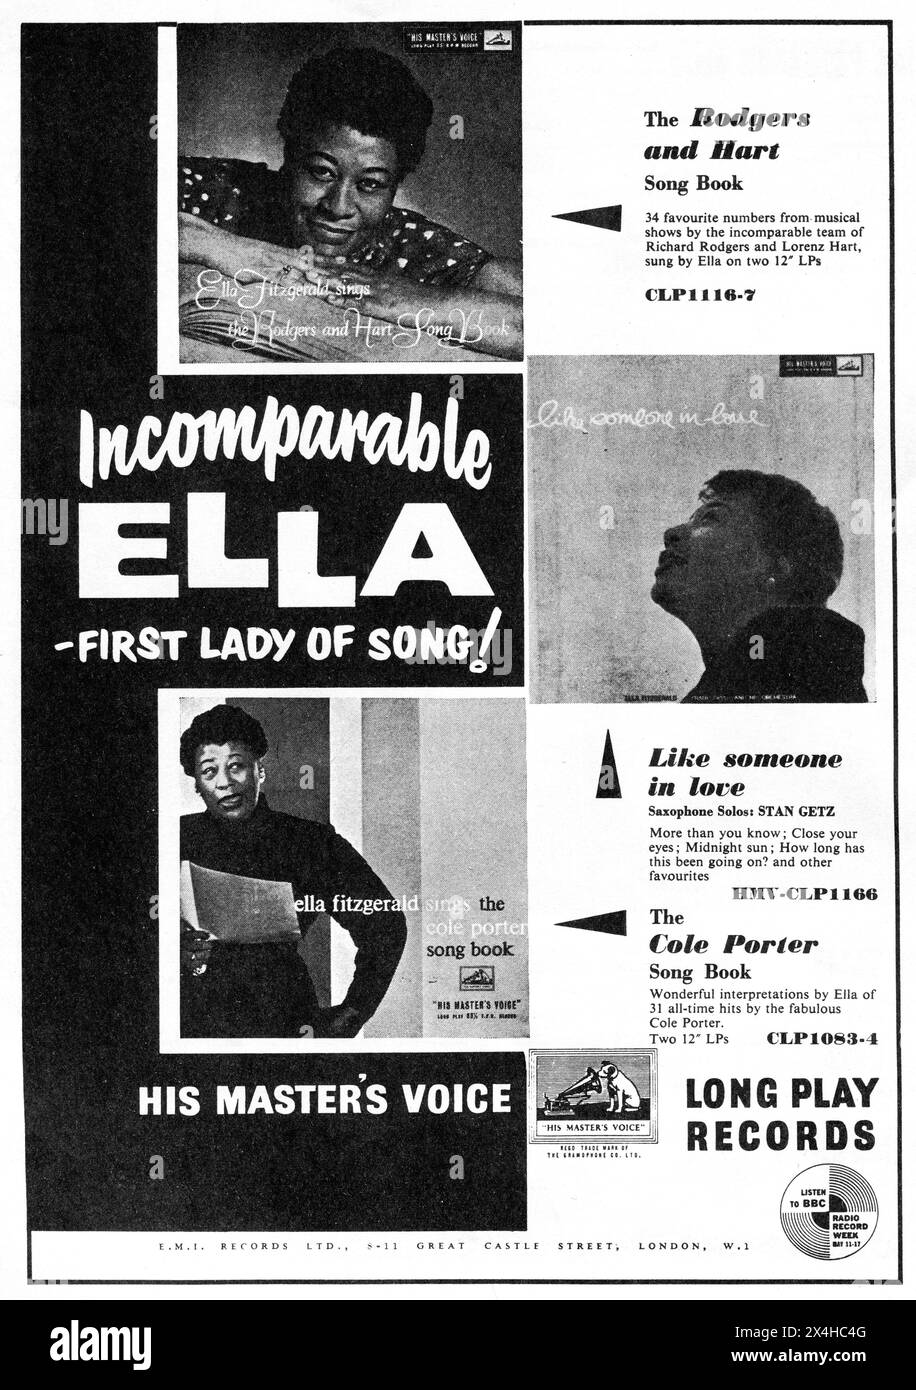 Circa. 1957 – An E.M.I. Records Ltd advertisement entitled “Incomparable Ella – First lady of Song!”, promoting Ella Fitzgerald's jazz long play records released on the ‘His Masters Voice’ label. The records featured are ”Ella Fitzgerald Sings the Rodgers & Hart Song Book”, “Like Someone in Love” and “Ella Fitzgerald Sings the Cole Porter Song Book”. Stock Photo